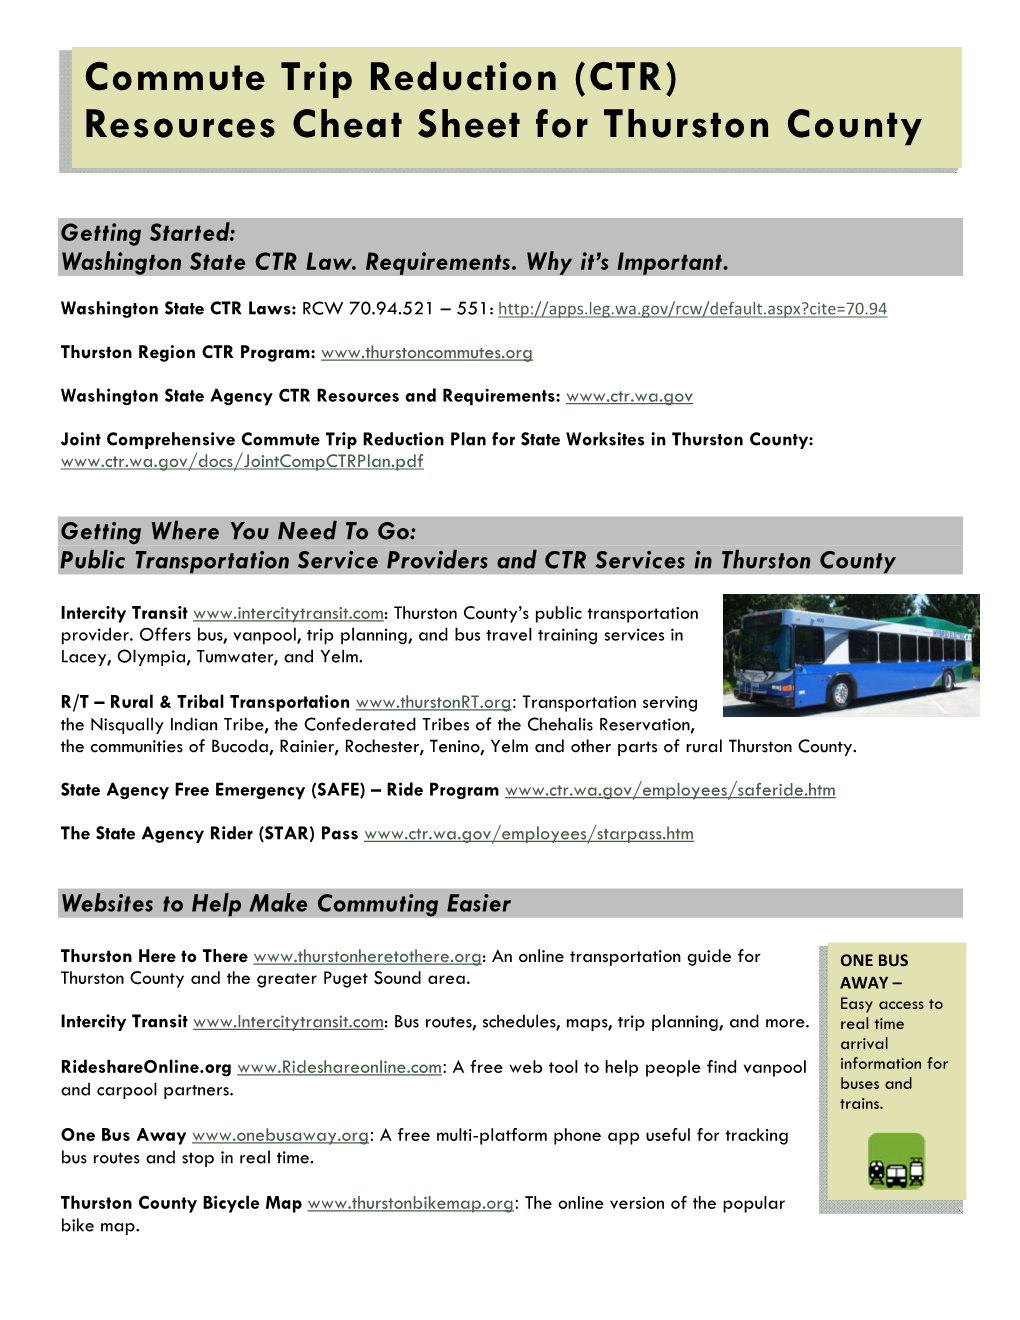 Commute Trip Reduction (CTR) Resources Cheat Sheet for Thurston County